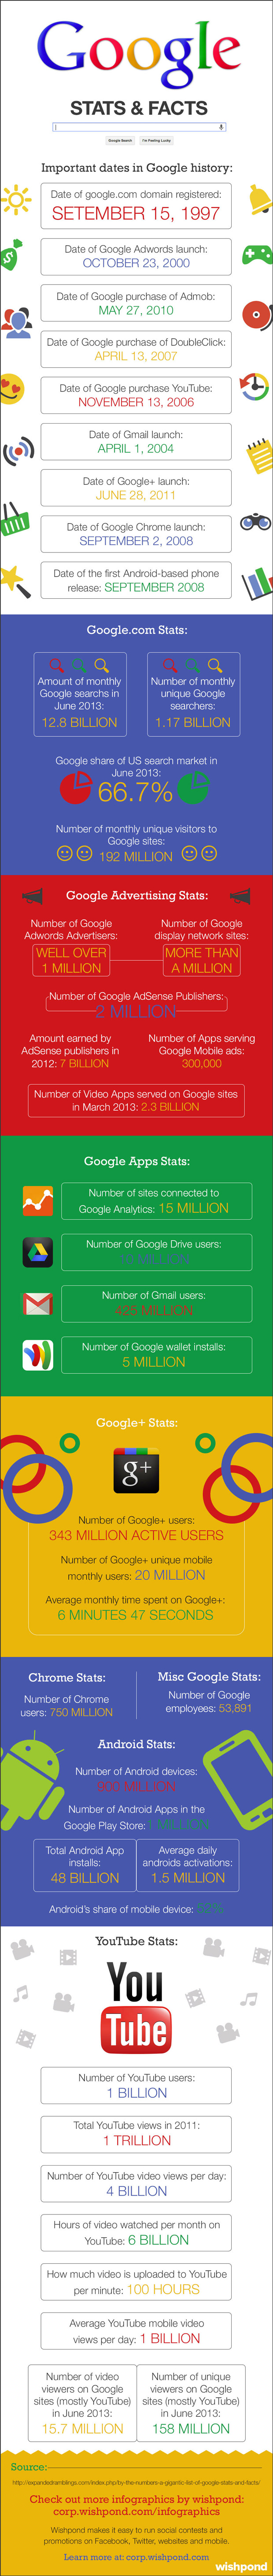 Google Stats and Facts